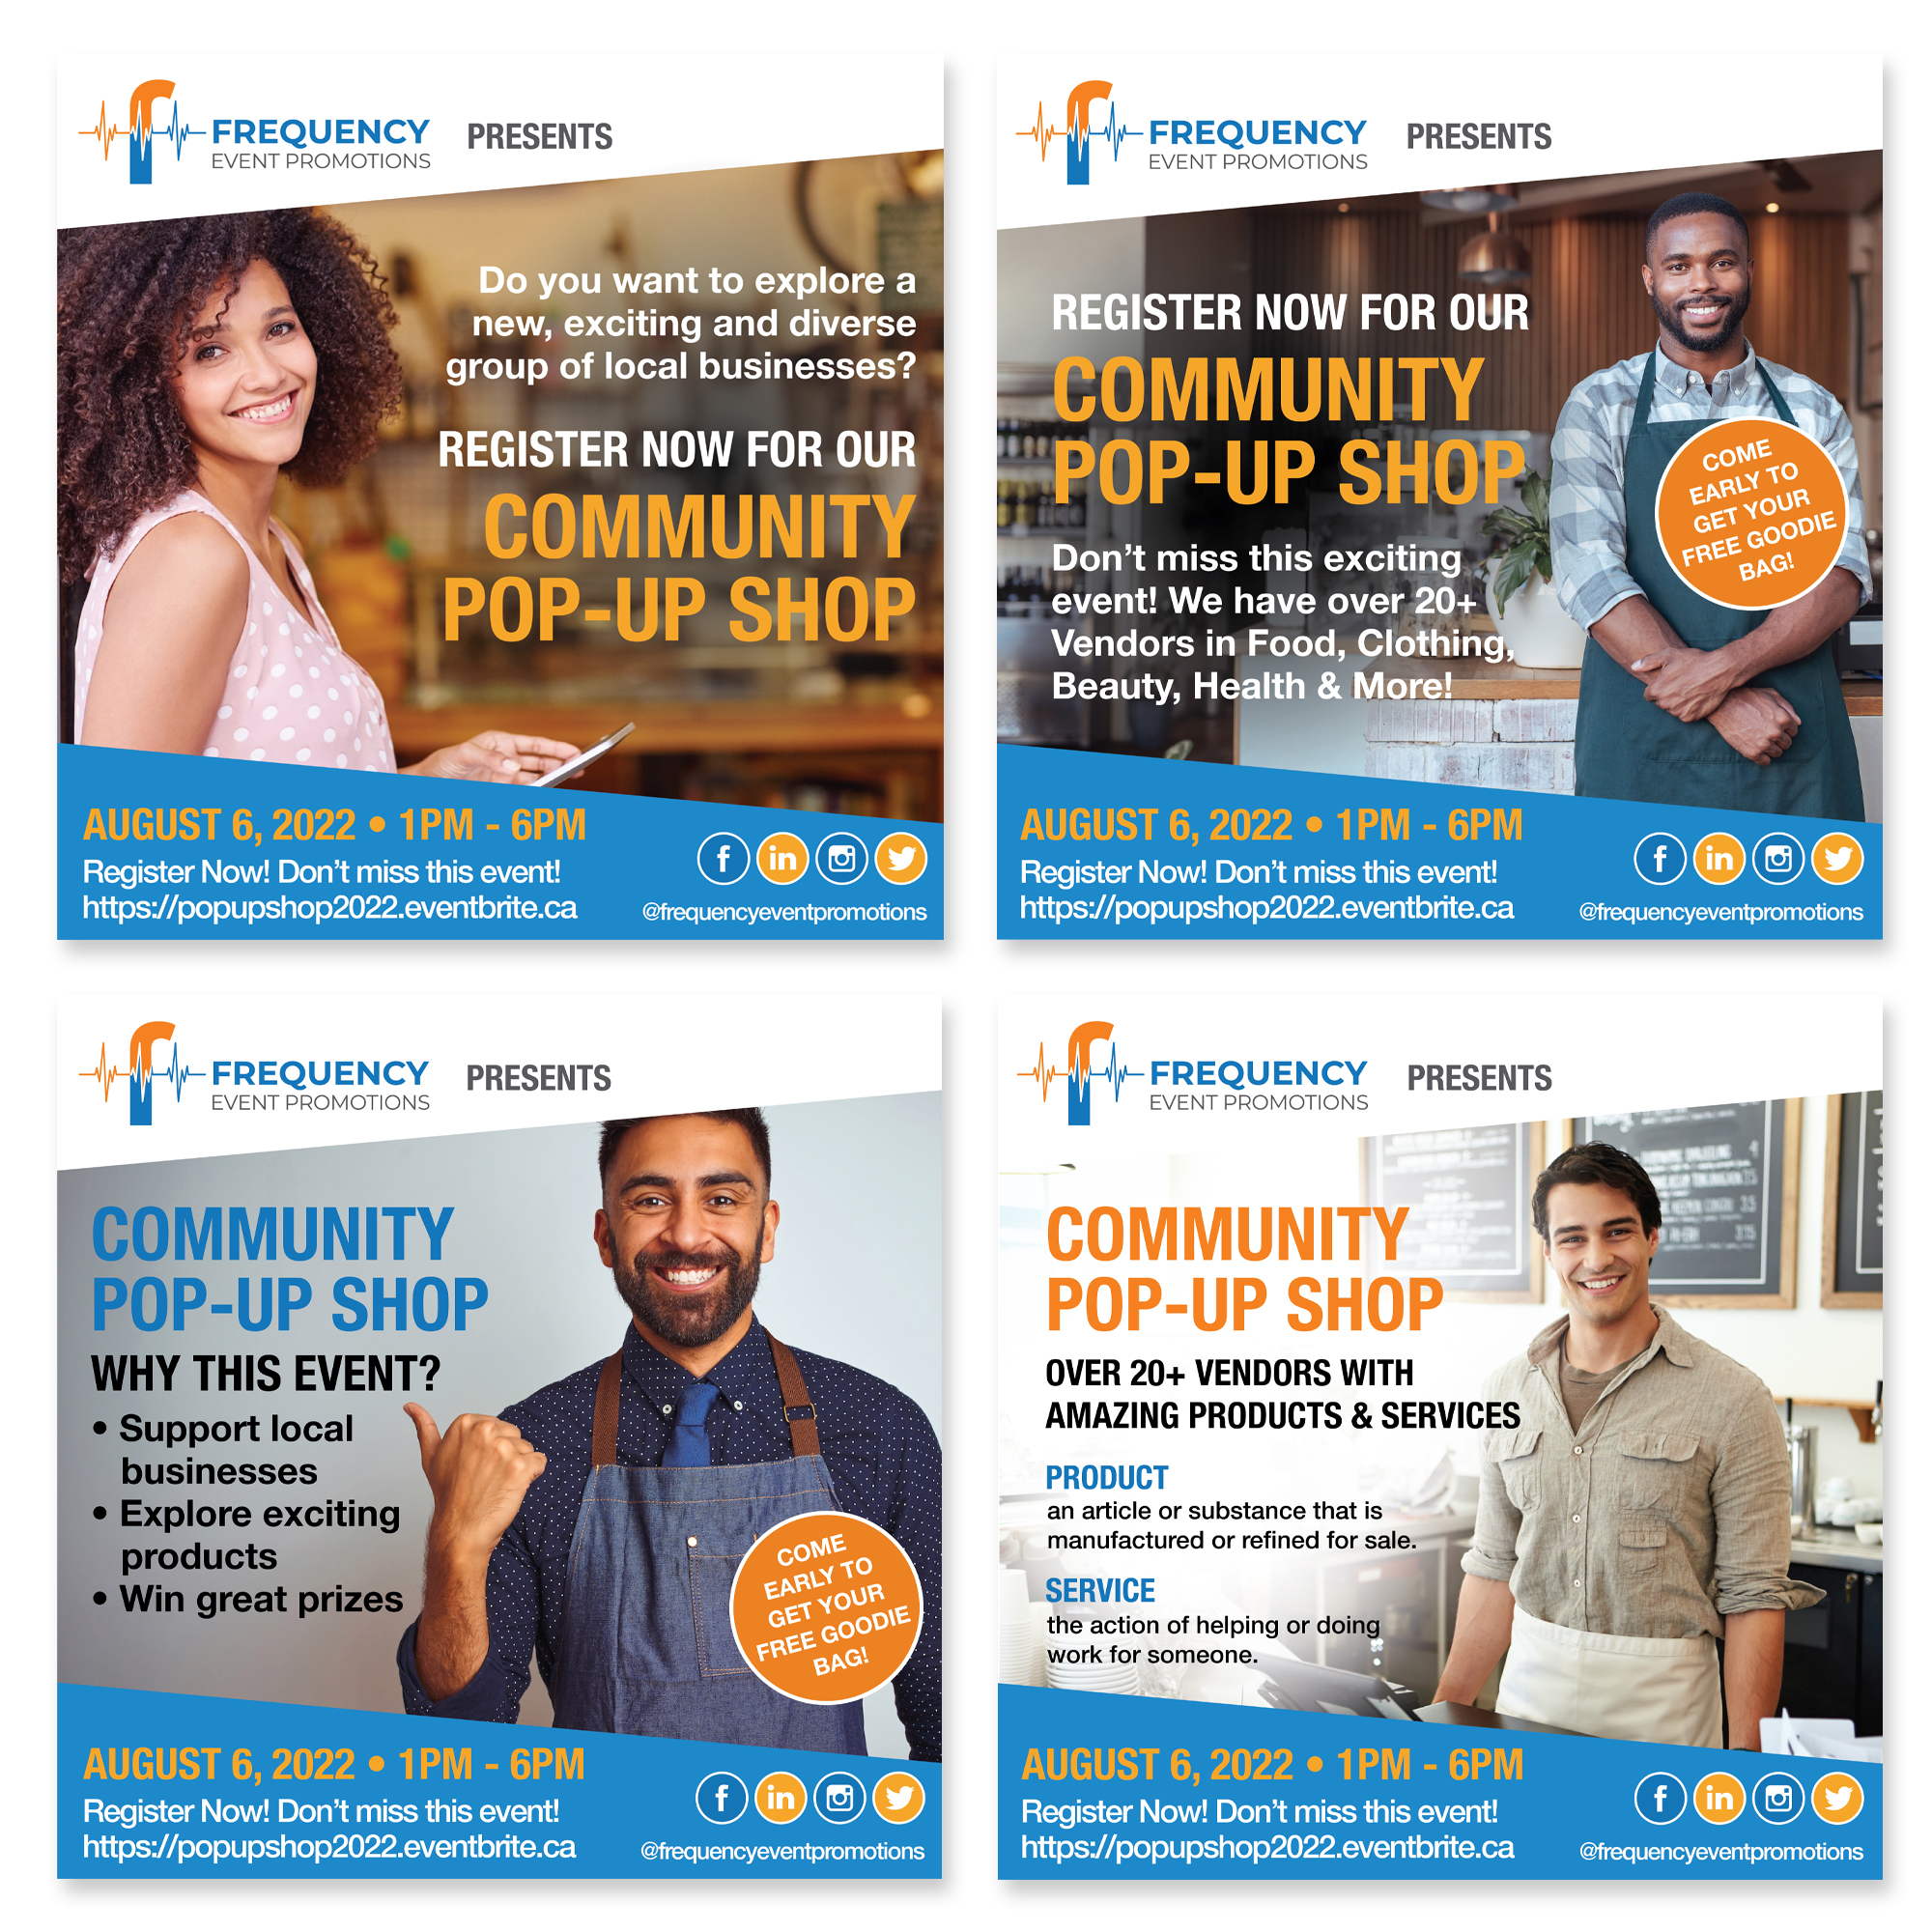 Frequency Event Promotions - Community Pop-Up Event - Social Media Marketing